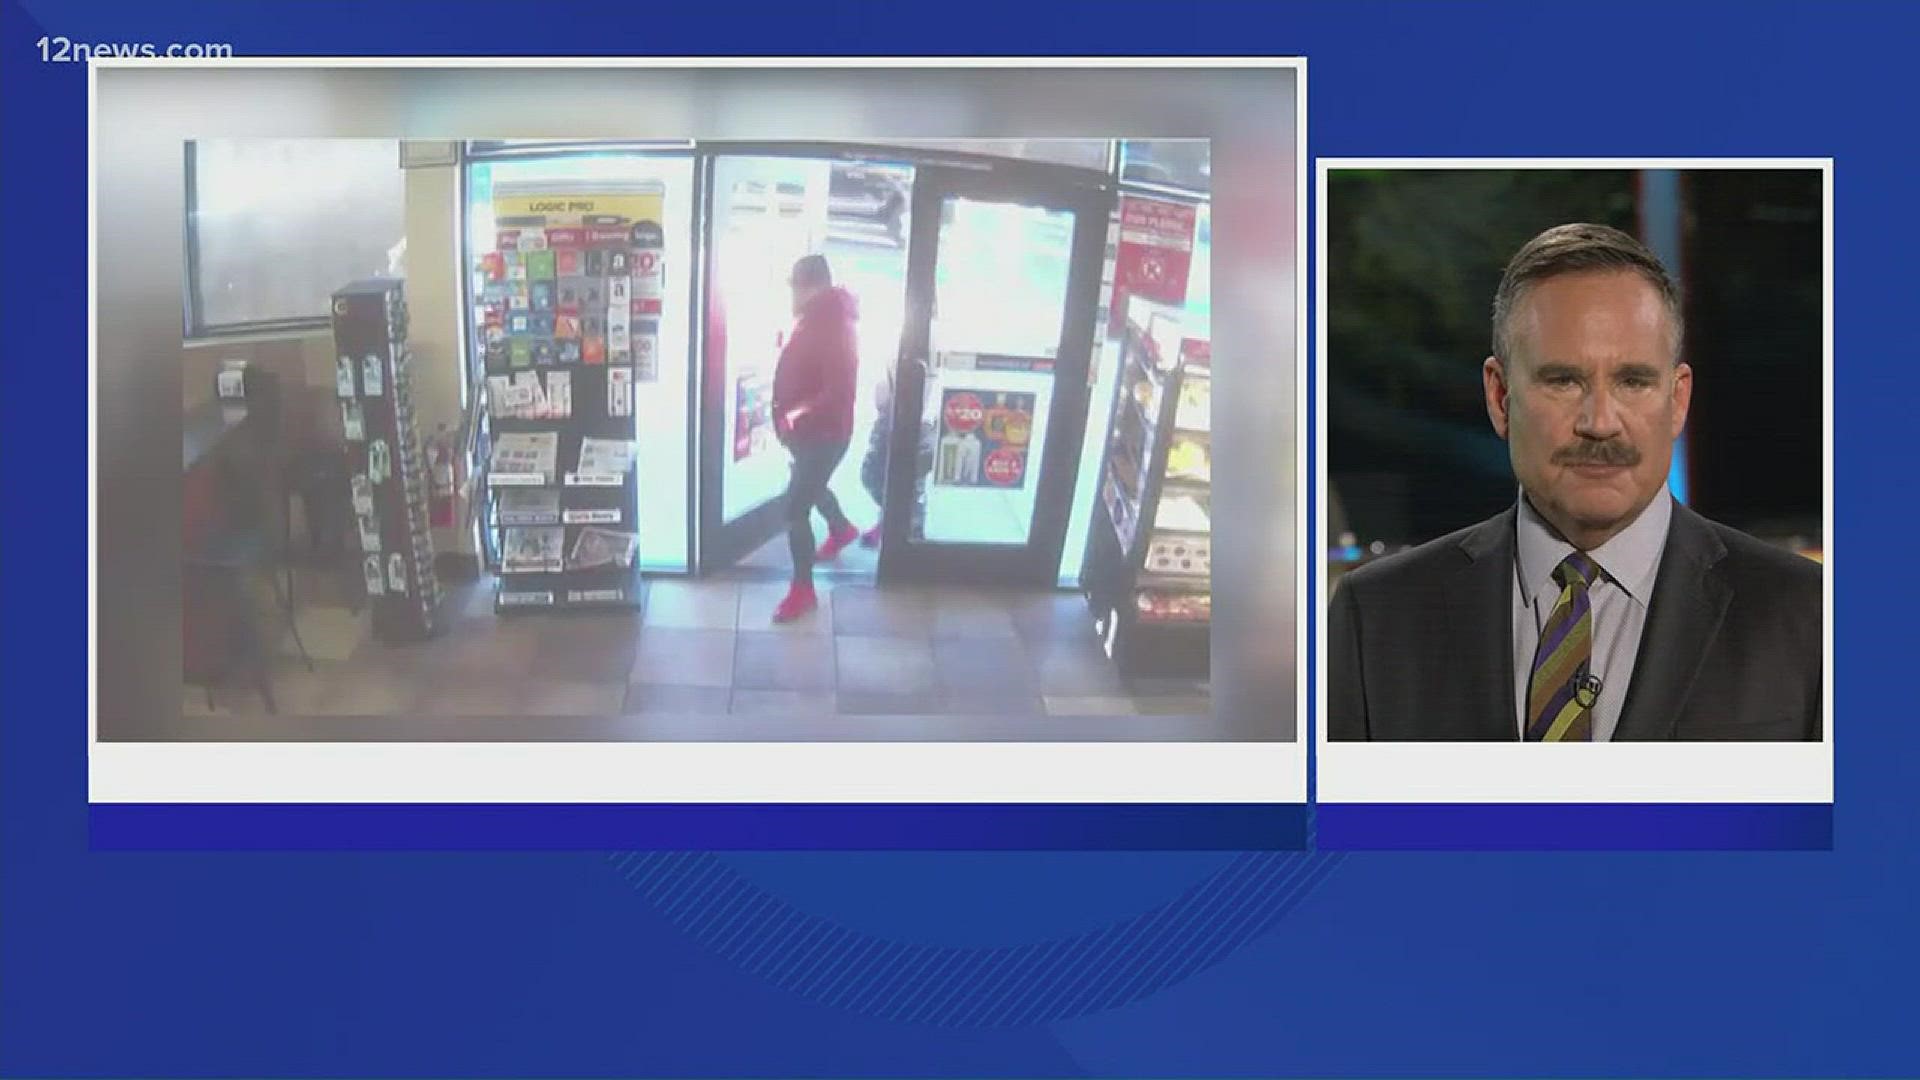 Phoenix Police are looking for a couple of criminals that tried to steal credit and debit card information from customers at a convenience store.